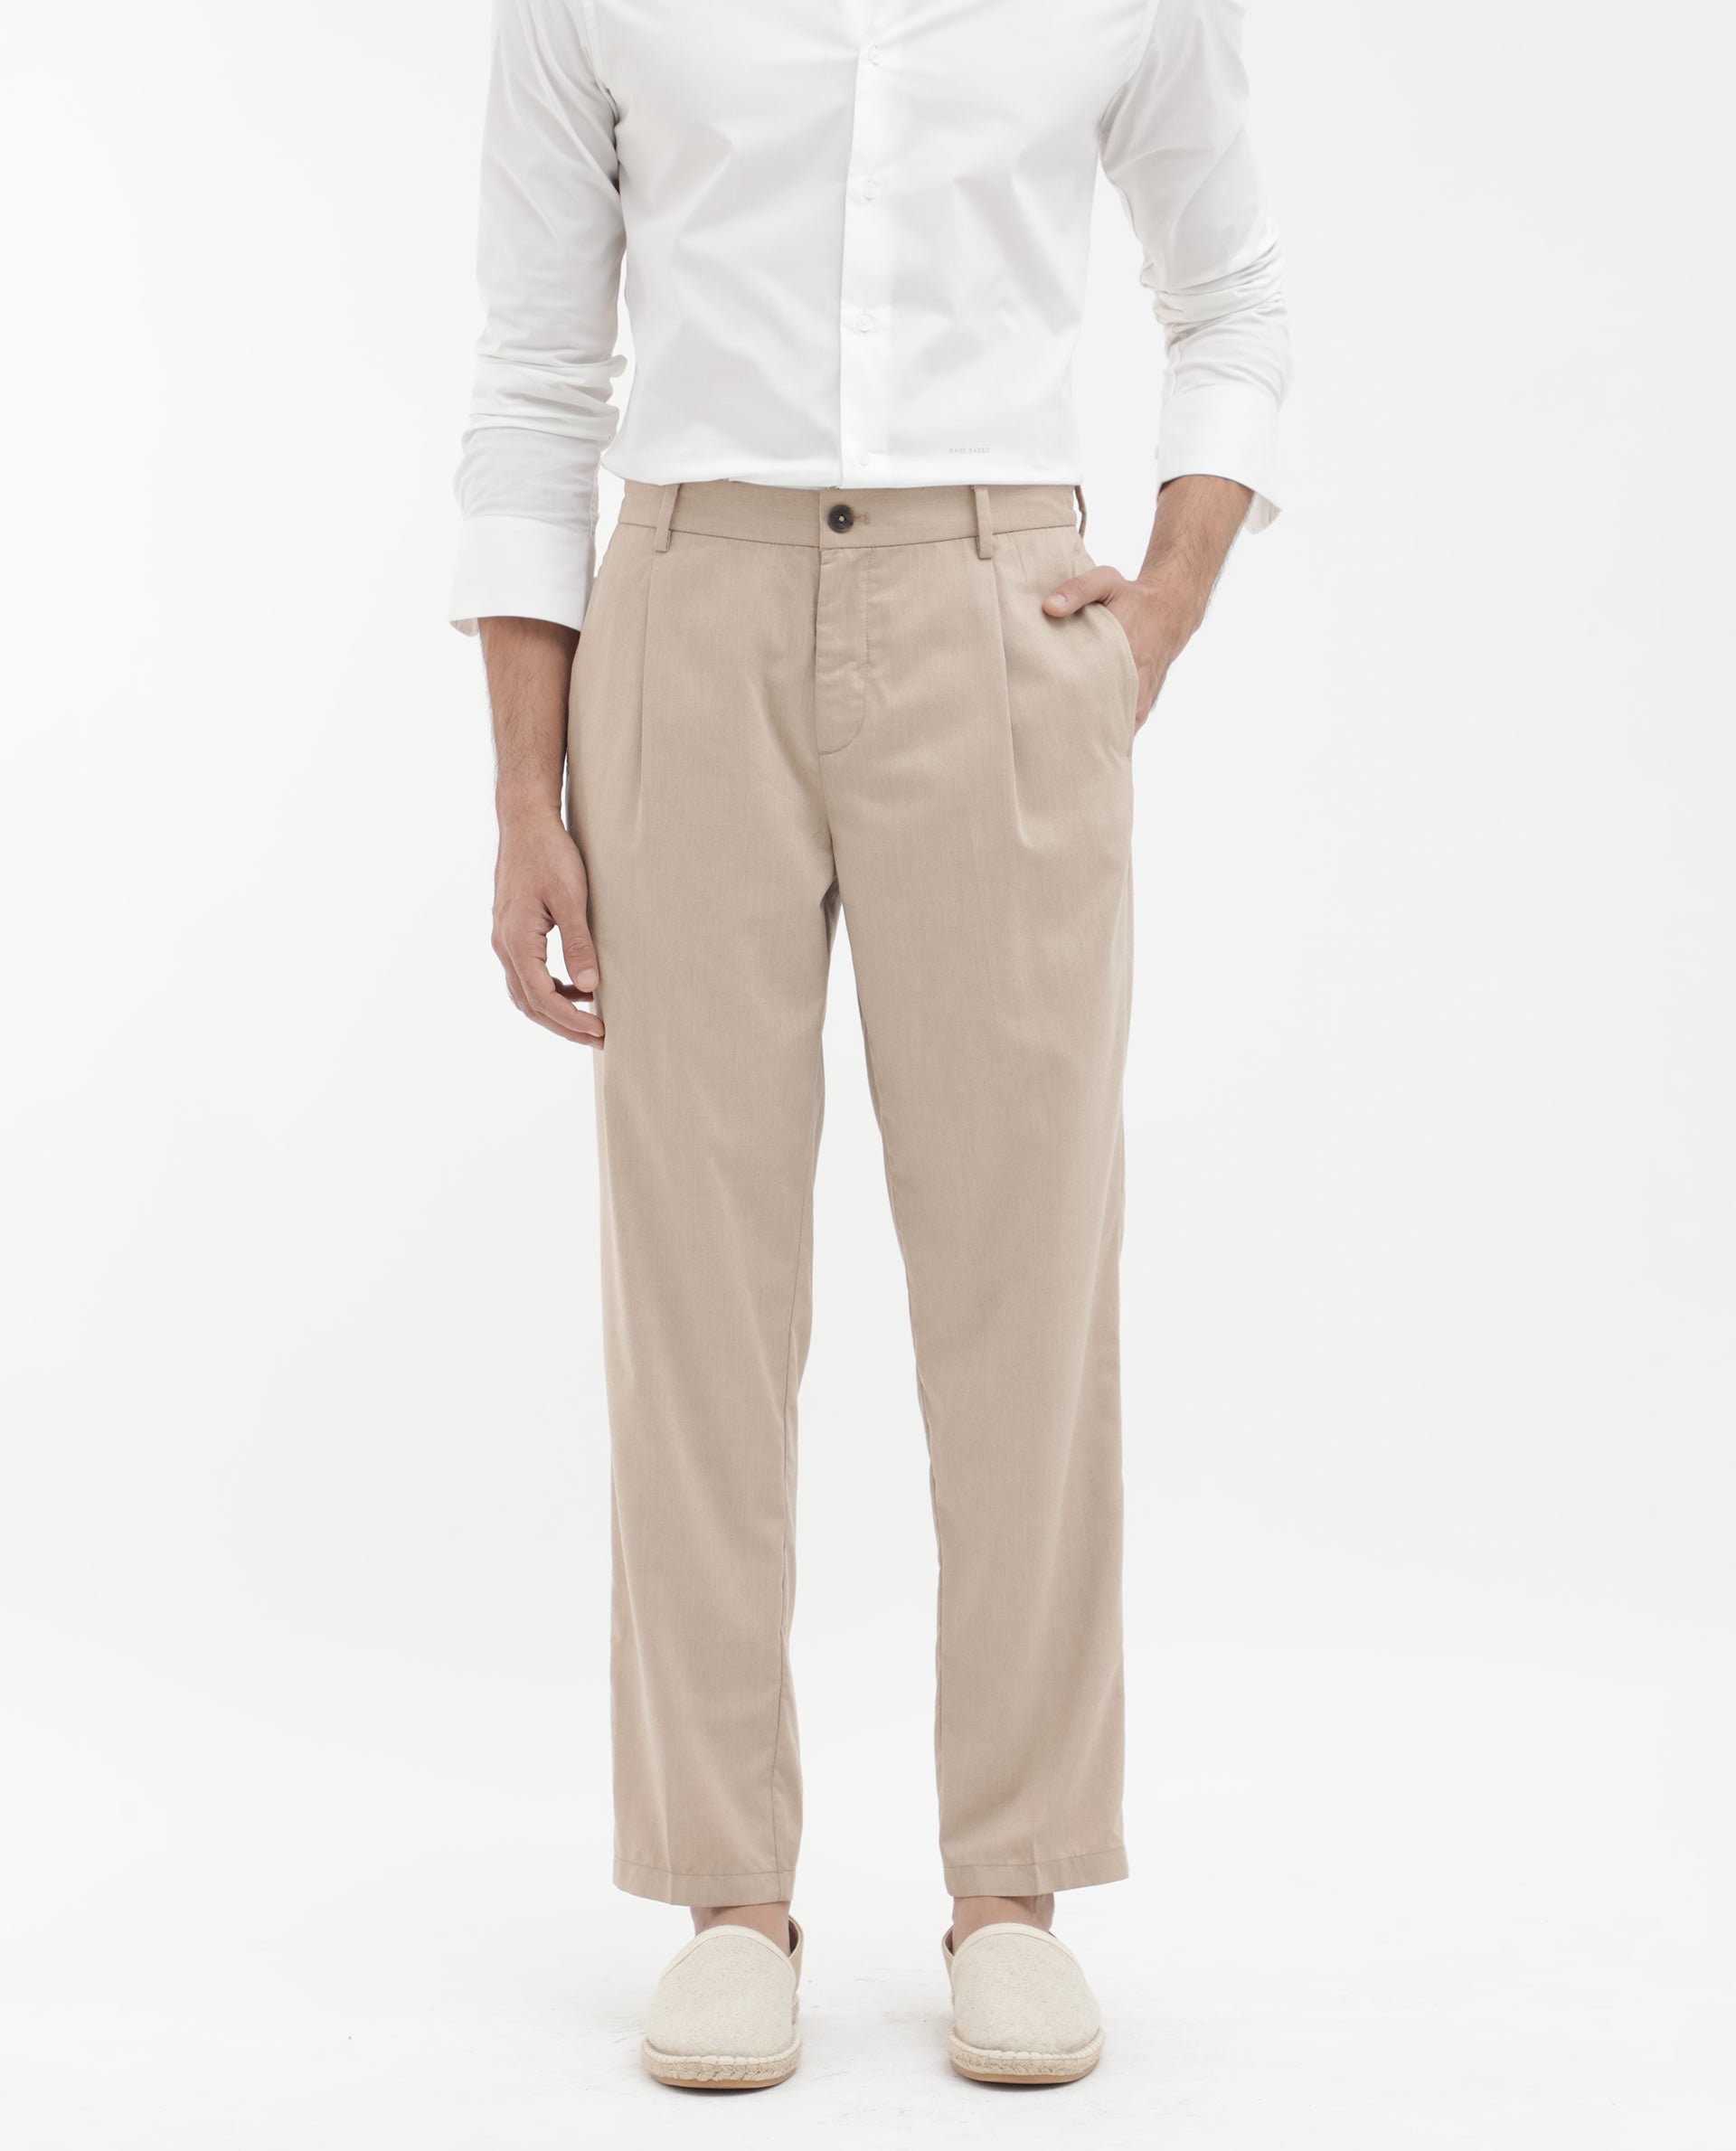 Burberry Ladies Heather Melange Jersey Tailored Trousers, Brand Size 10 (US  Size 8) - Walmart.com